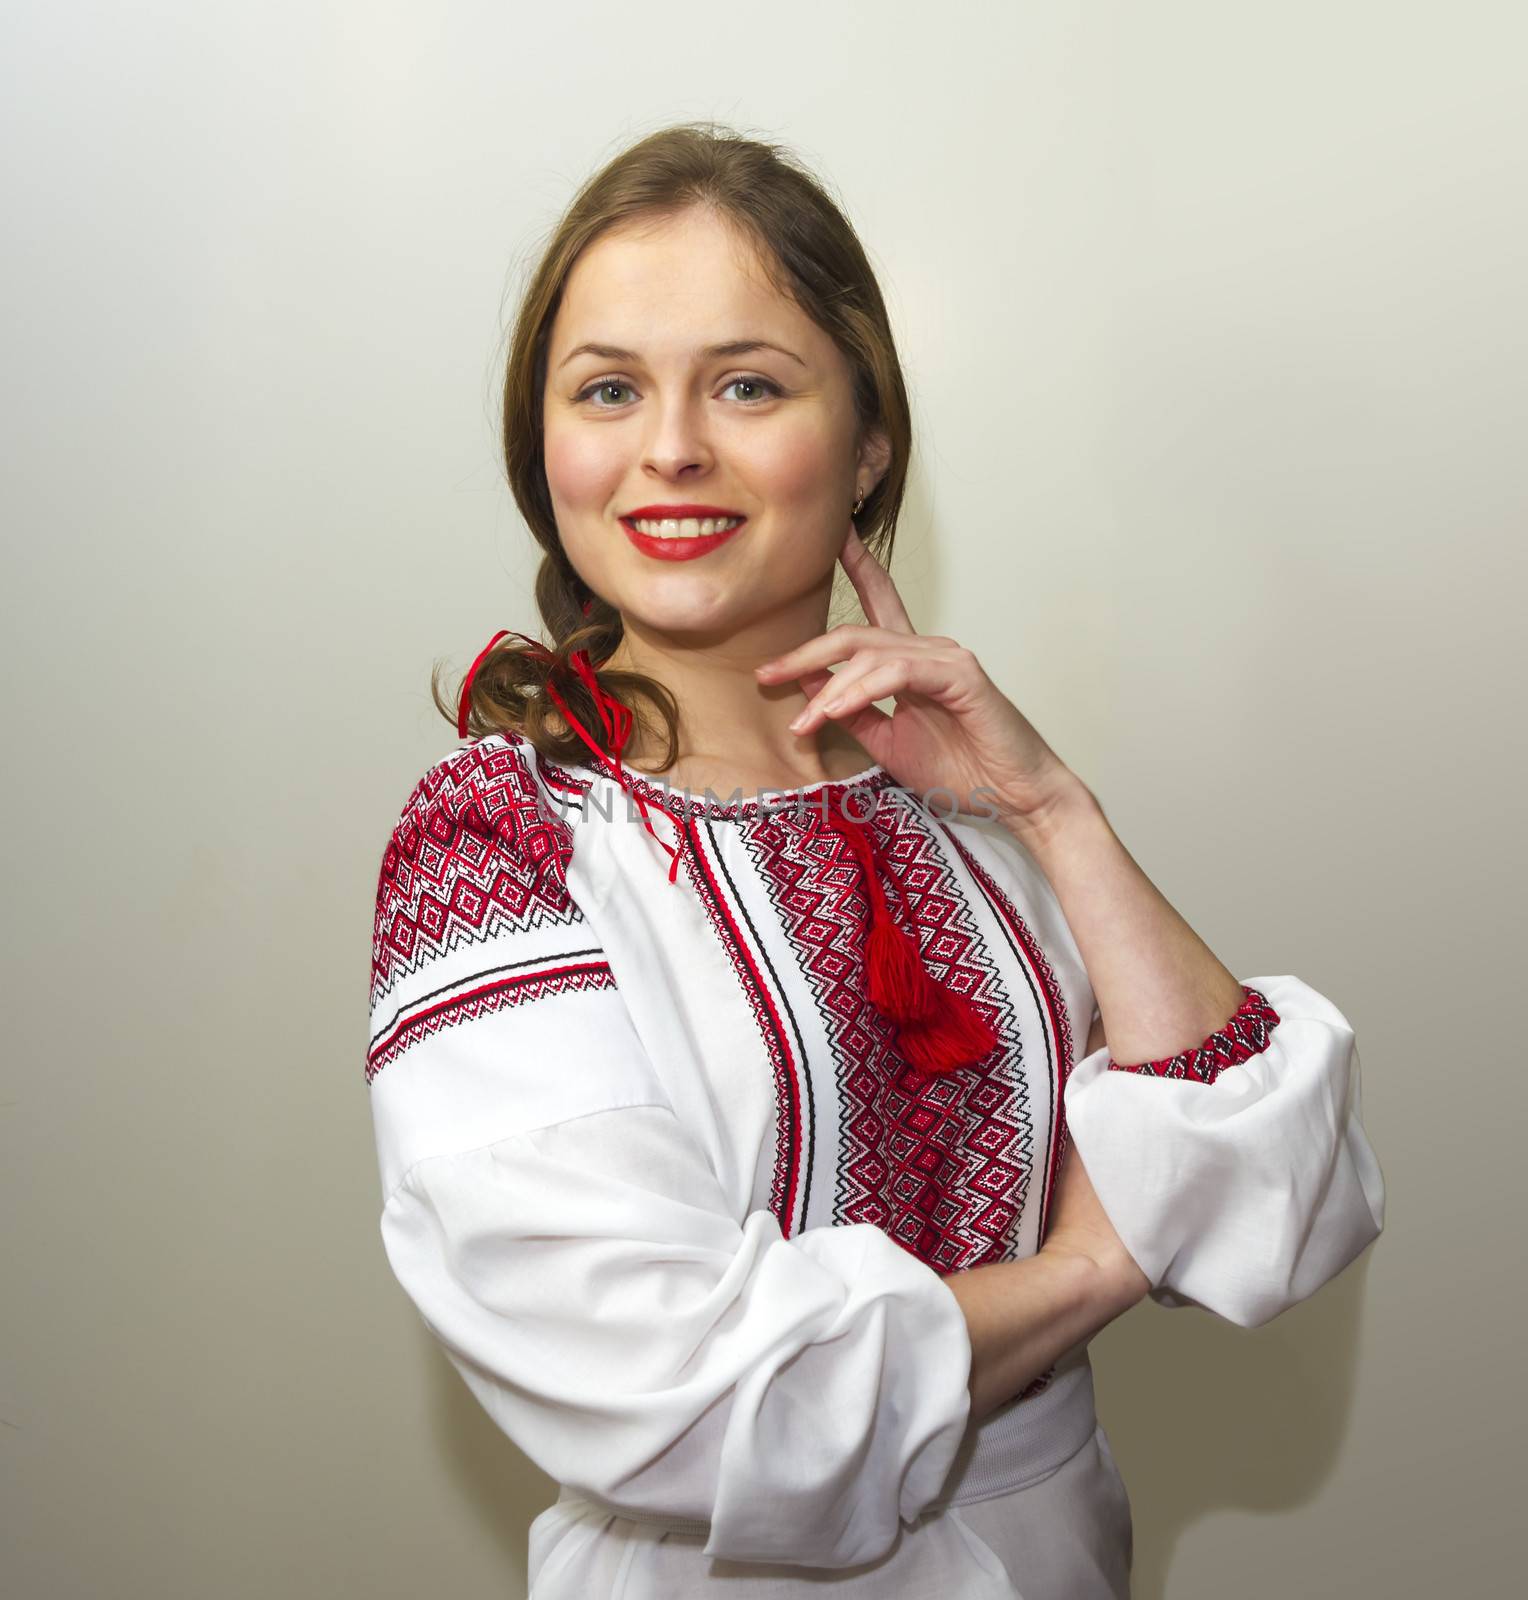 Portrait of beautiful young woman in the Ukrainian national clot by Tetyana